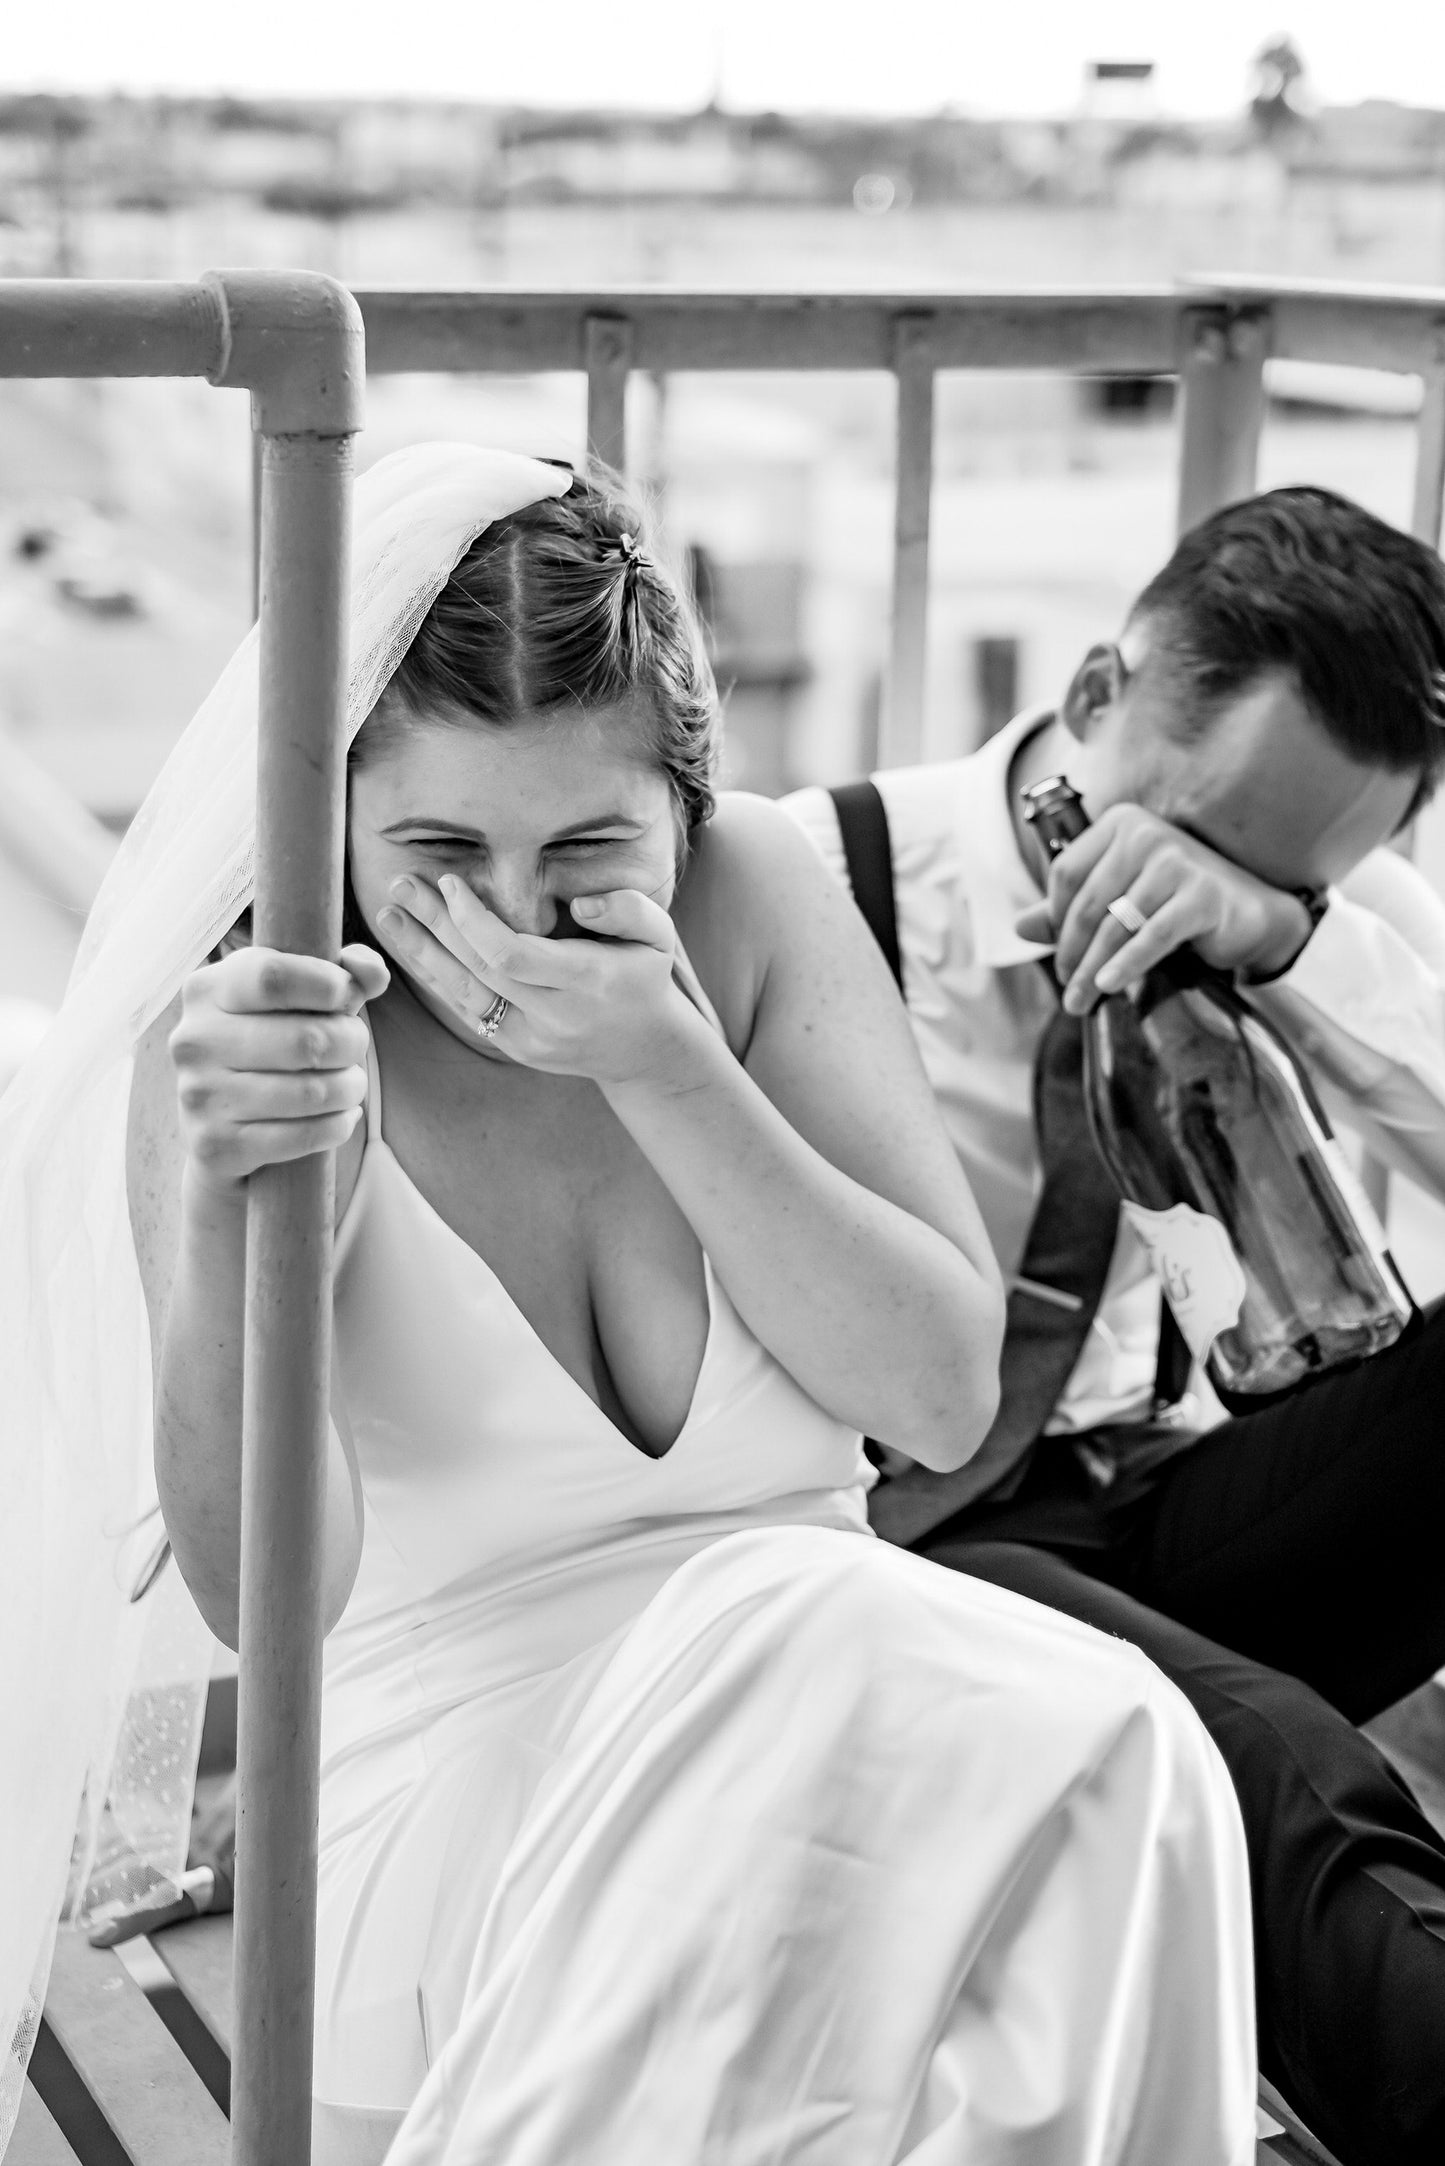 swiss dot wedding veil on bride as she laughs with groom at industrial chic venue